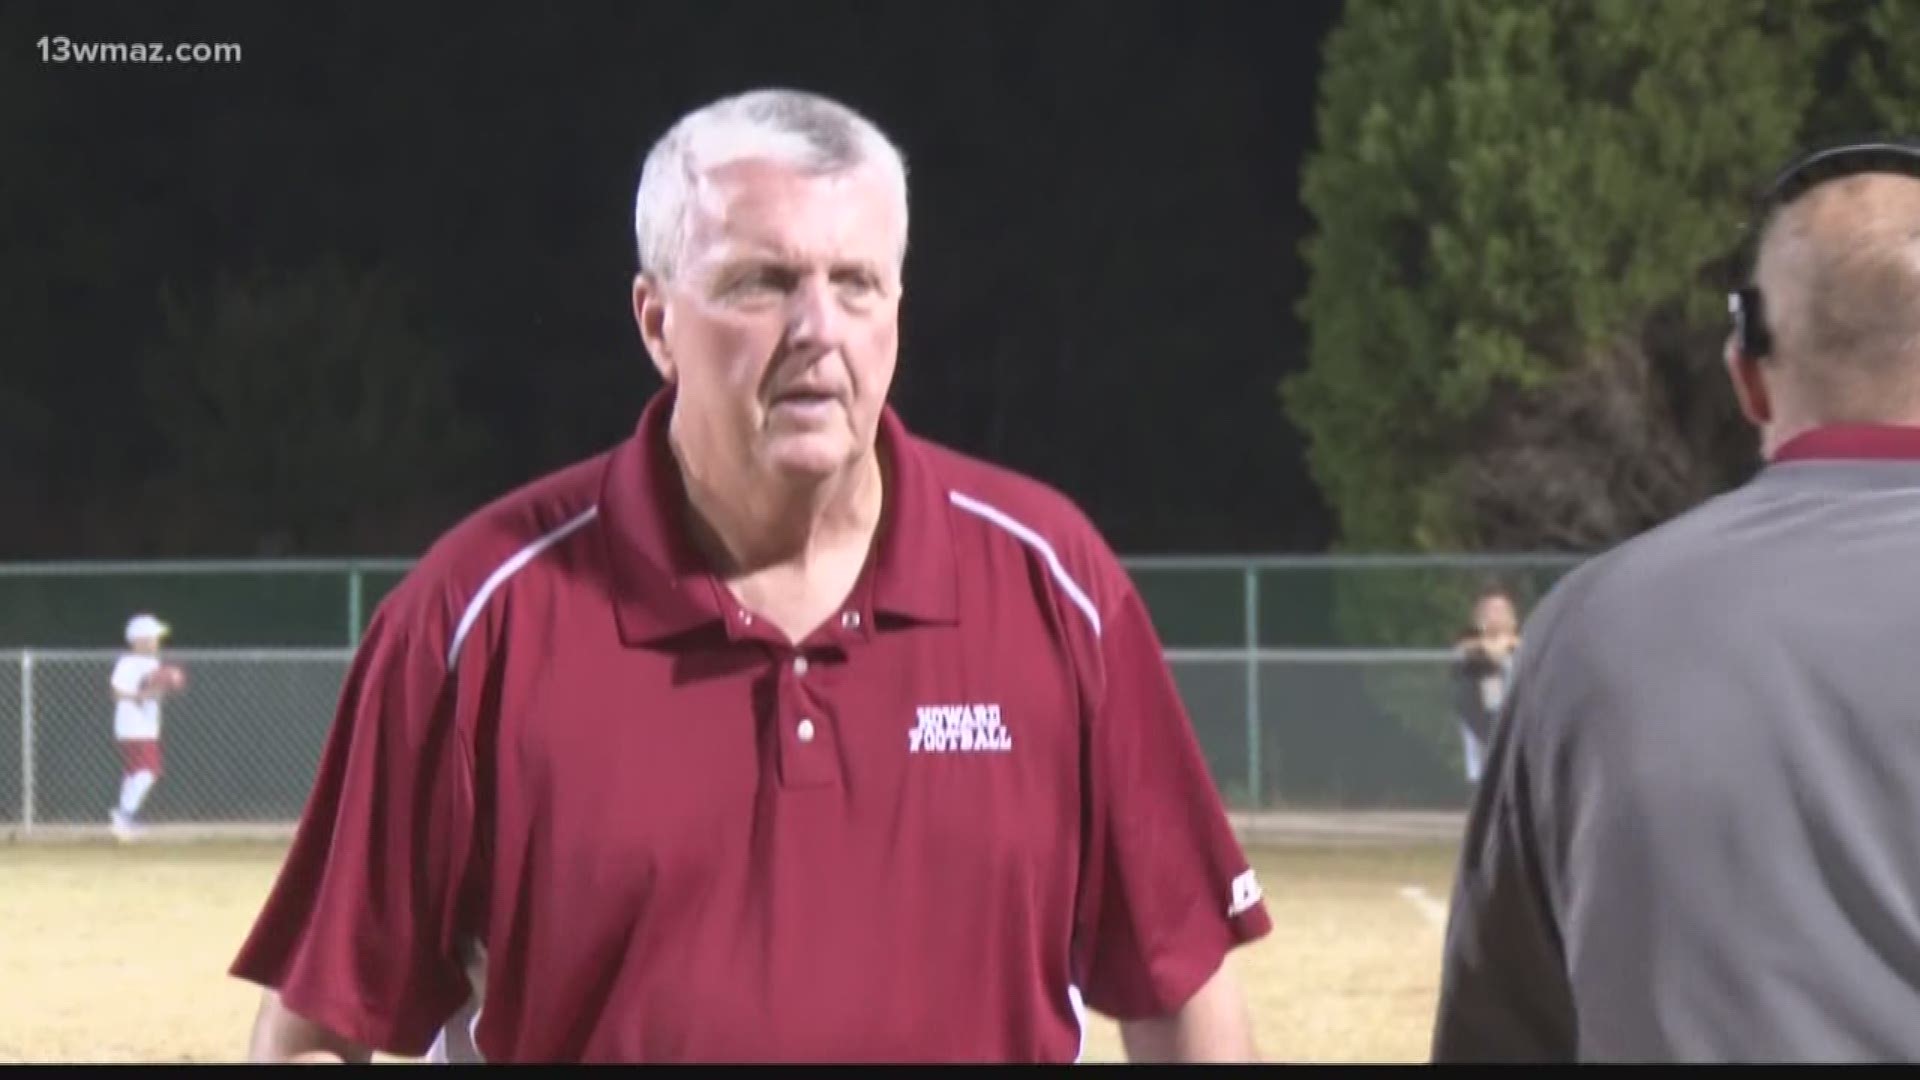 Barney Hester takes on new role as athletic director